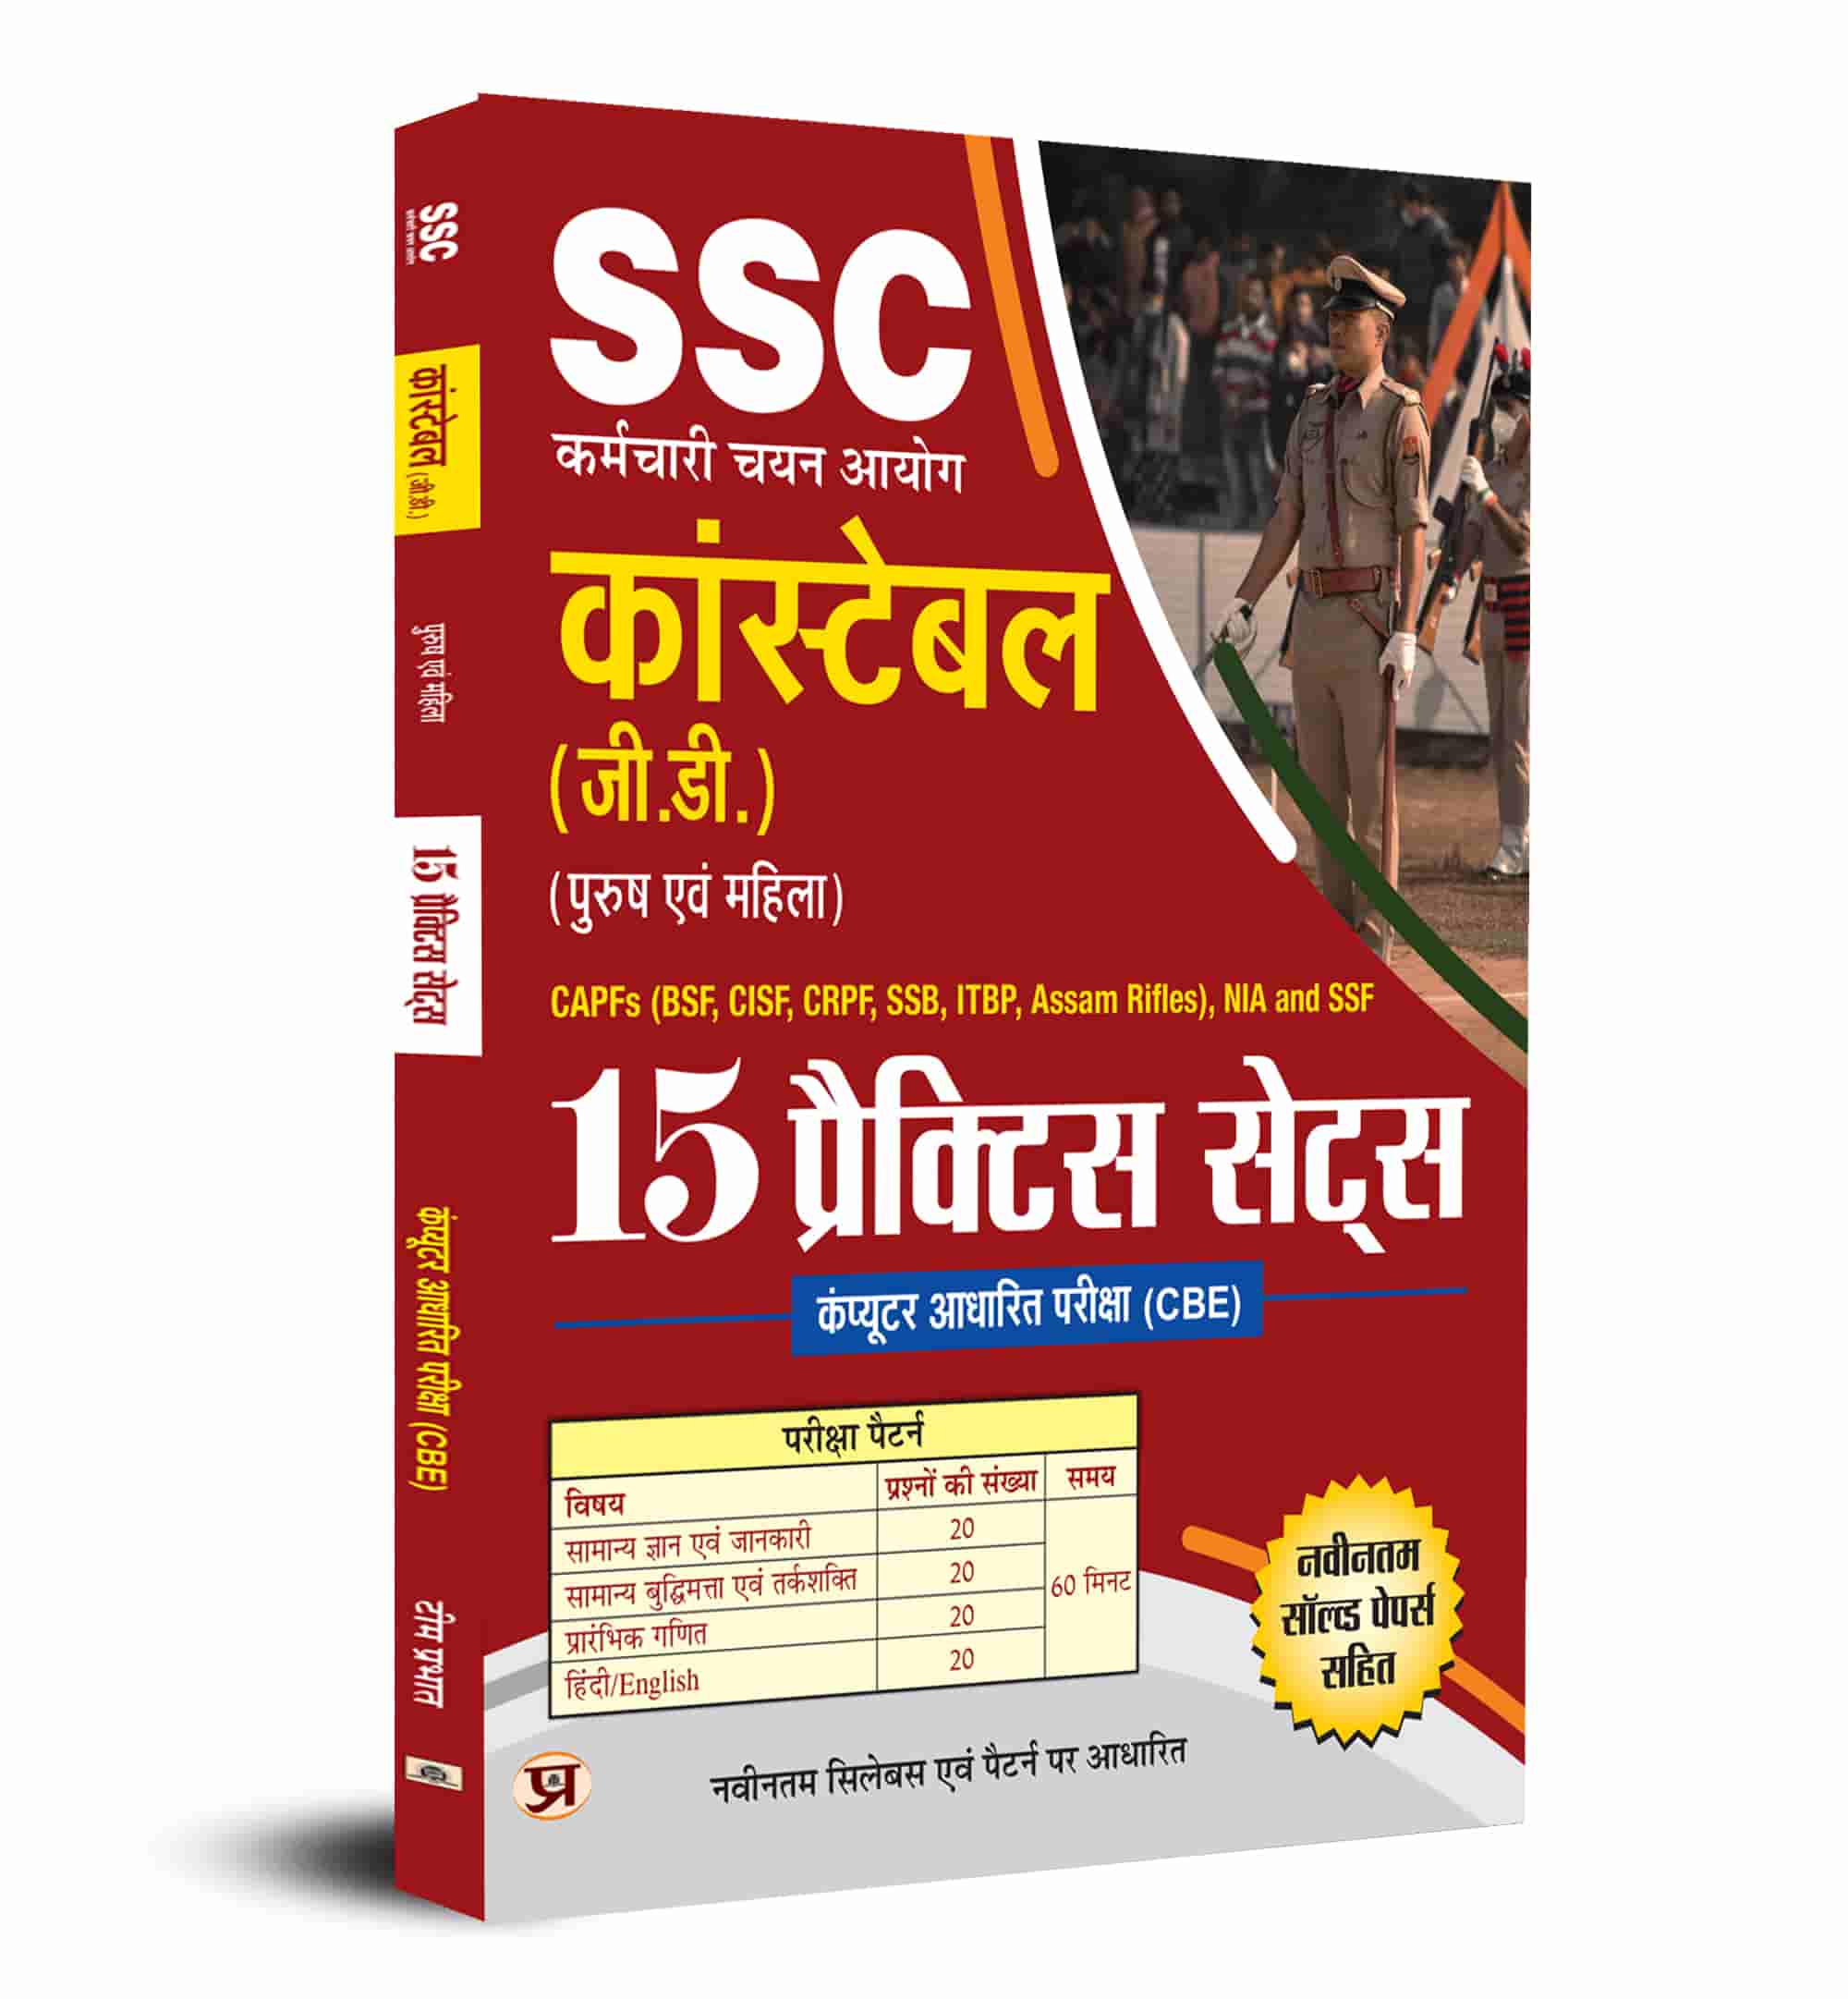 SSC GD Constable Computer Based Examination (CBE) 15 Practice Sets for CAPFs (BSF, CISF, CRPF, SSB, ITBP, Assam Rifles, NIA, SSF Book in Hindi